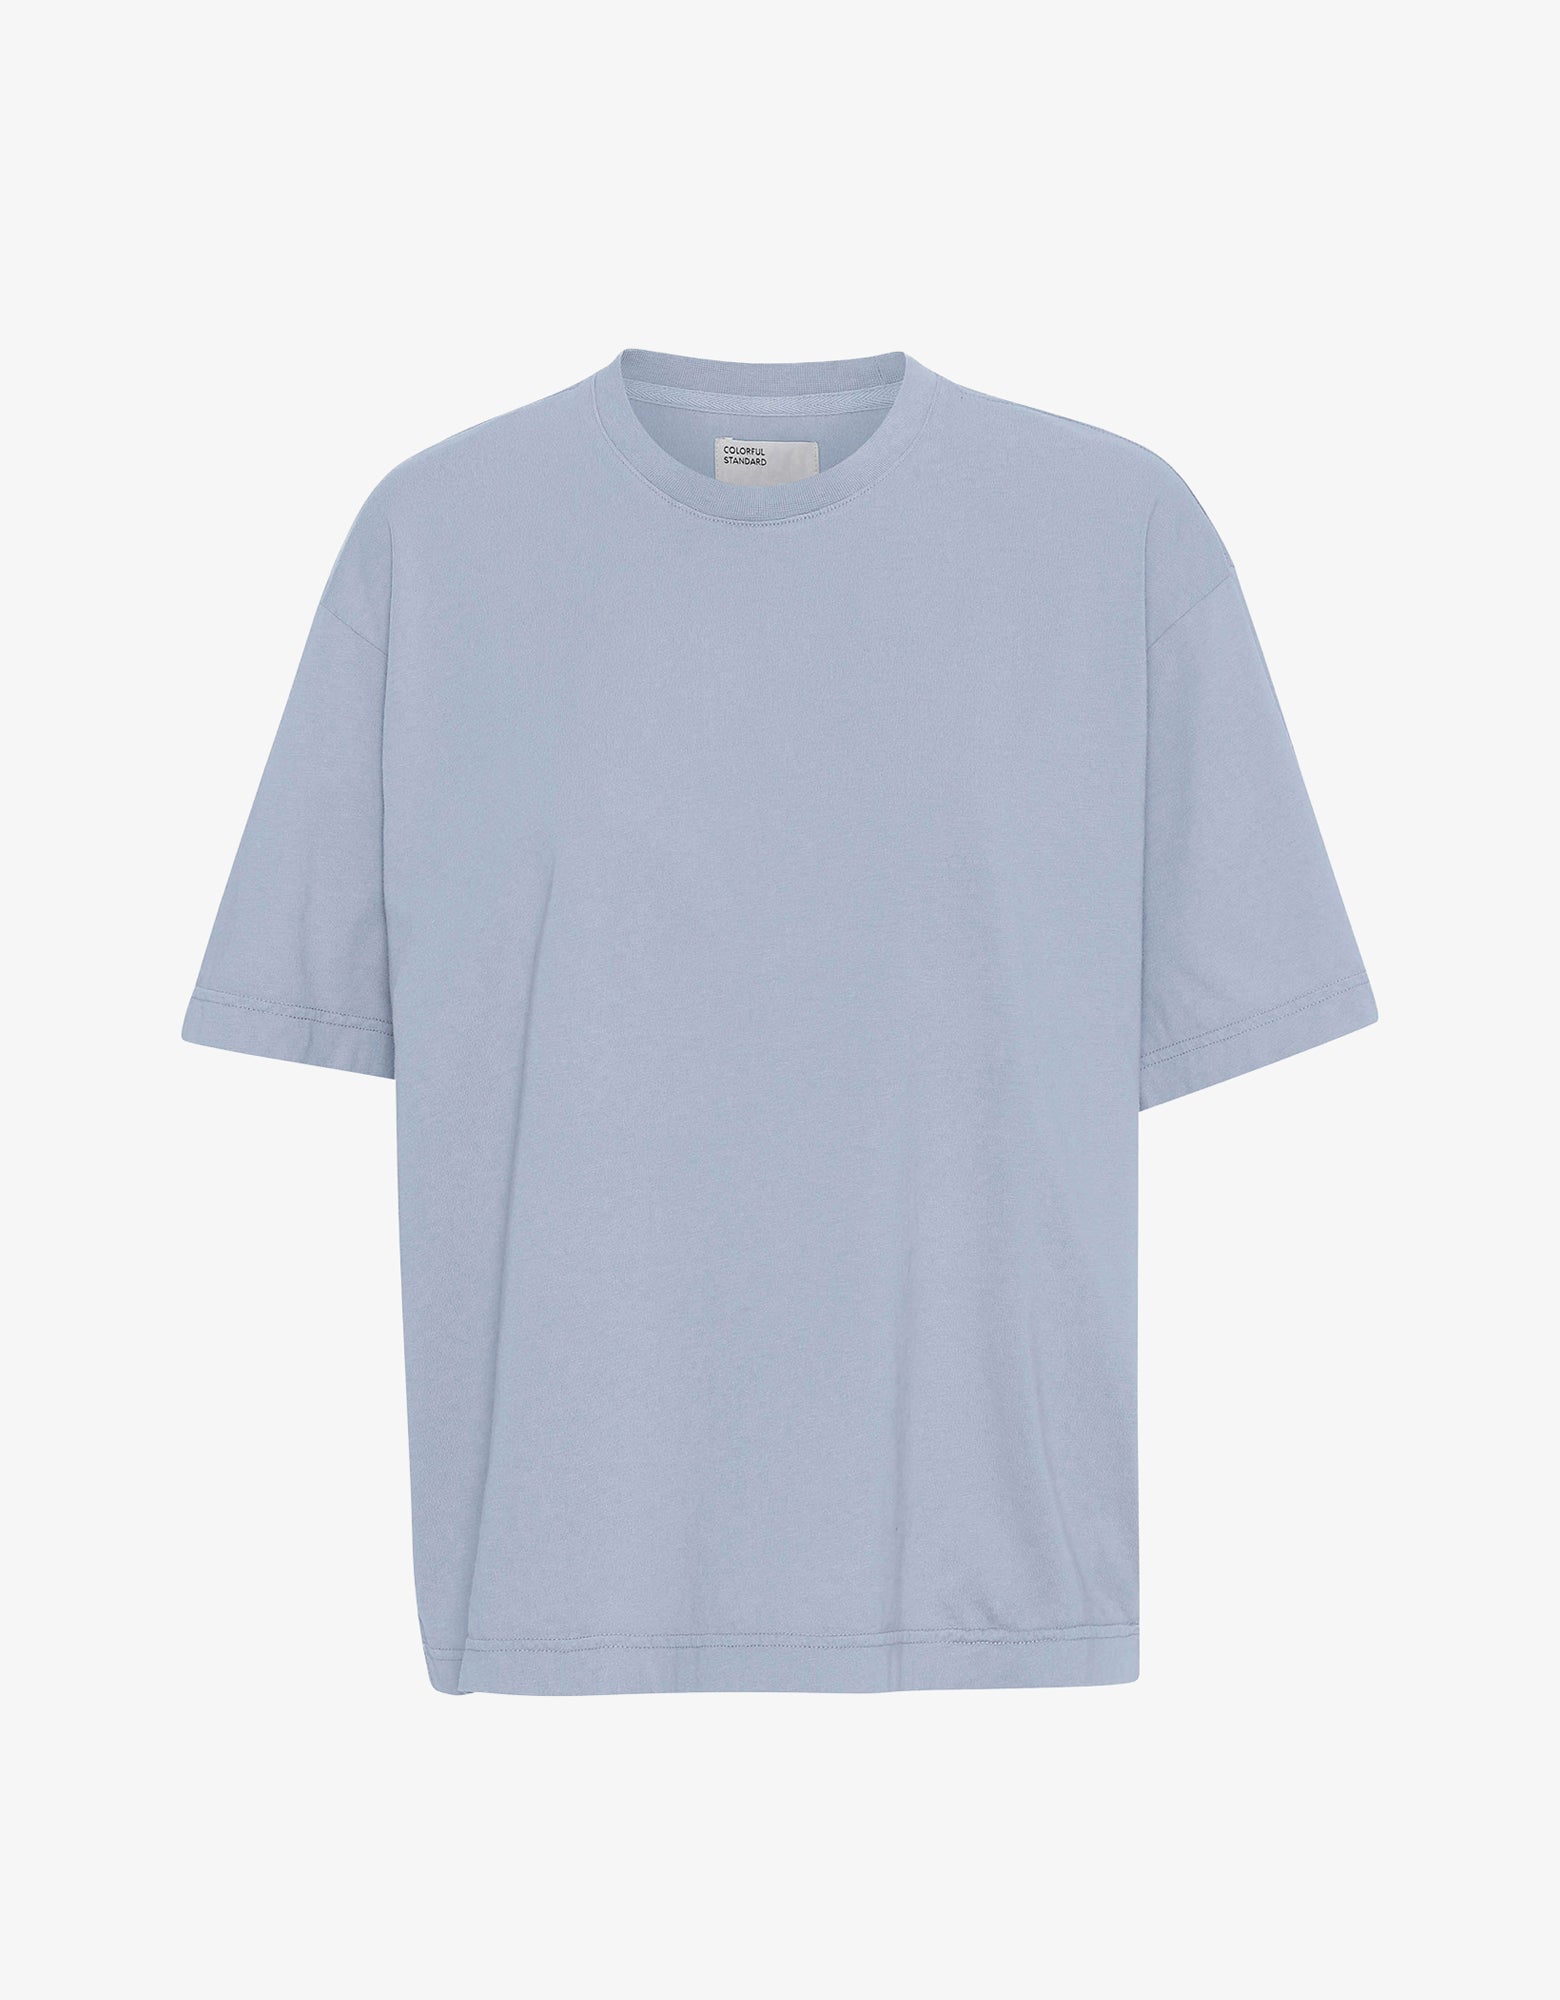 Oversized Organic T-Shirt - Teal Blue – Colorful Standard